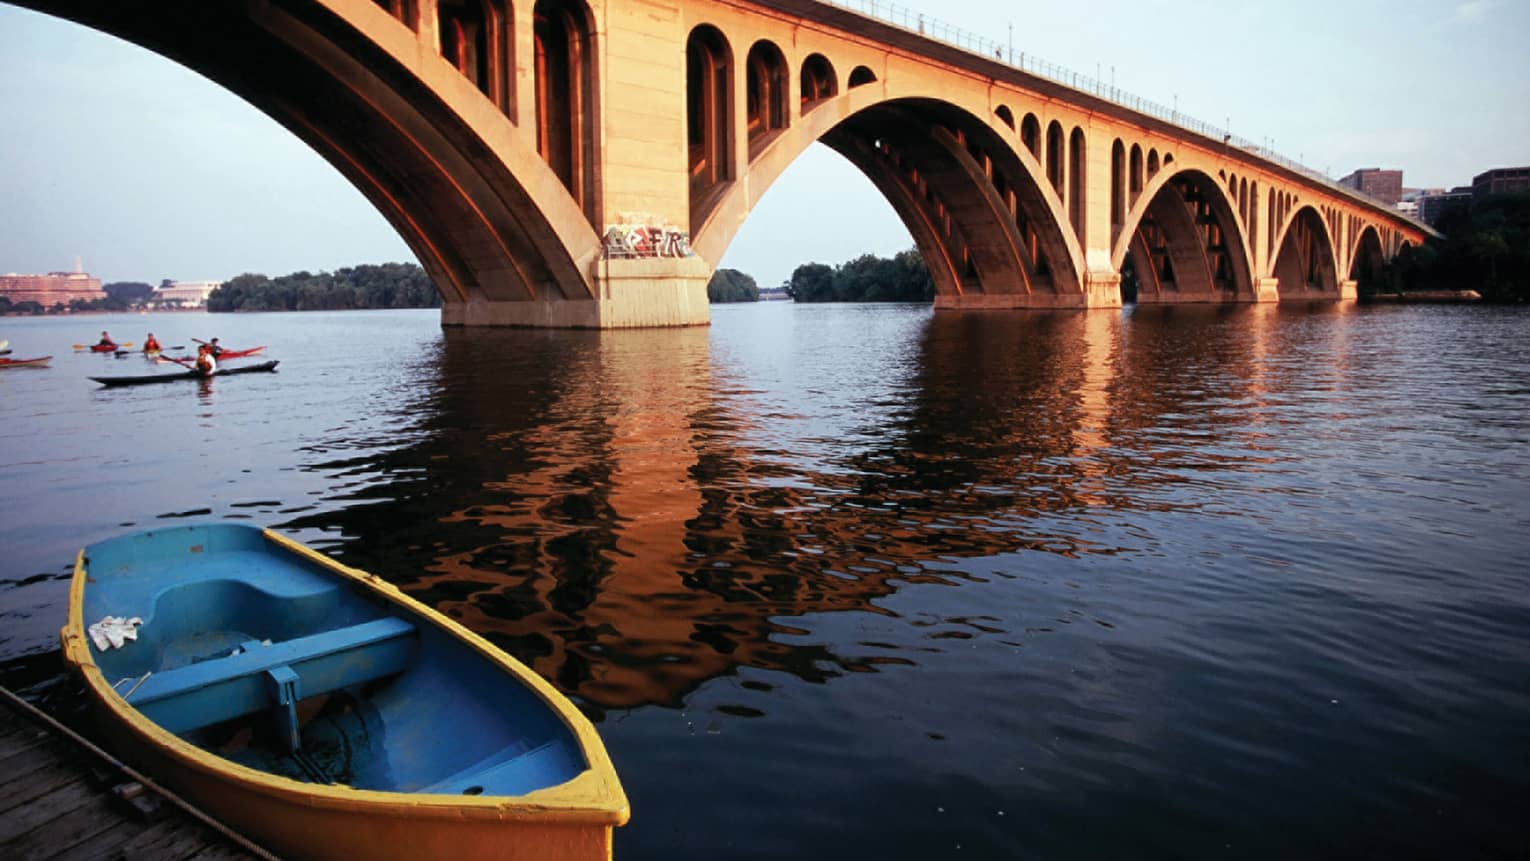 A wide river with a large bridge crossing it, there are people rowing kayaks under the bridge.